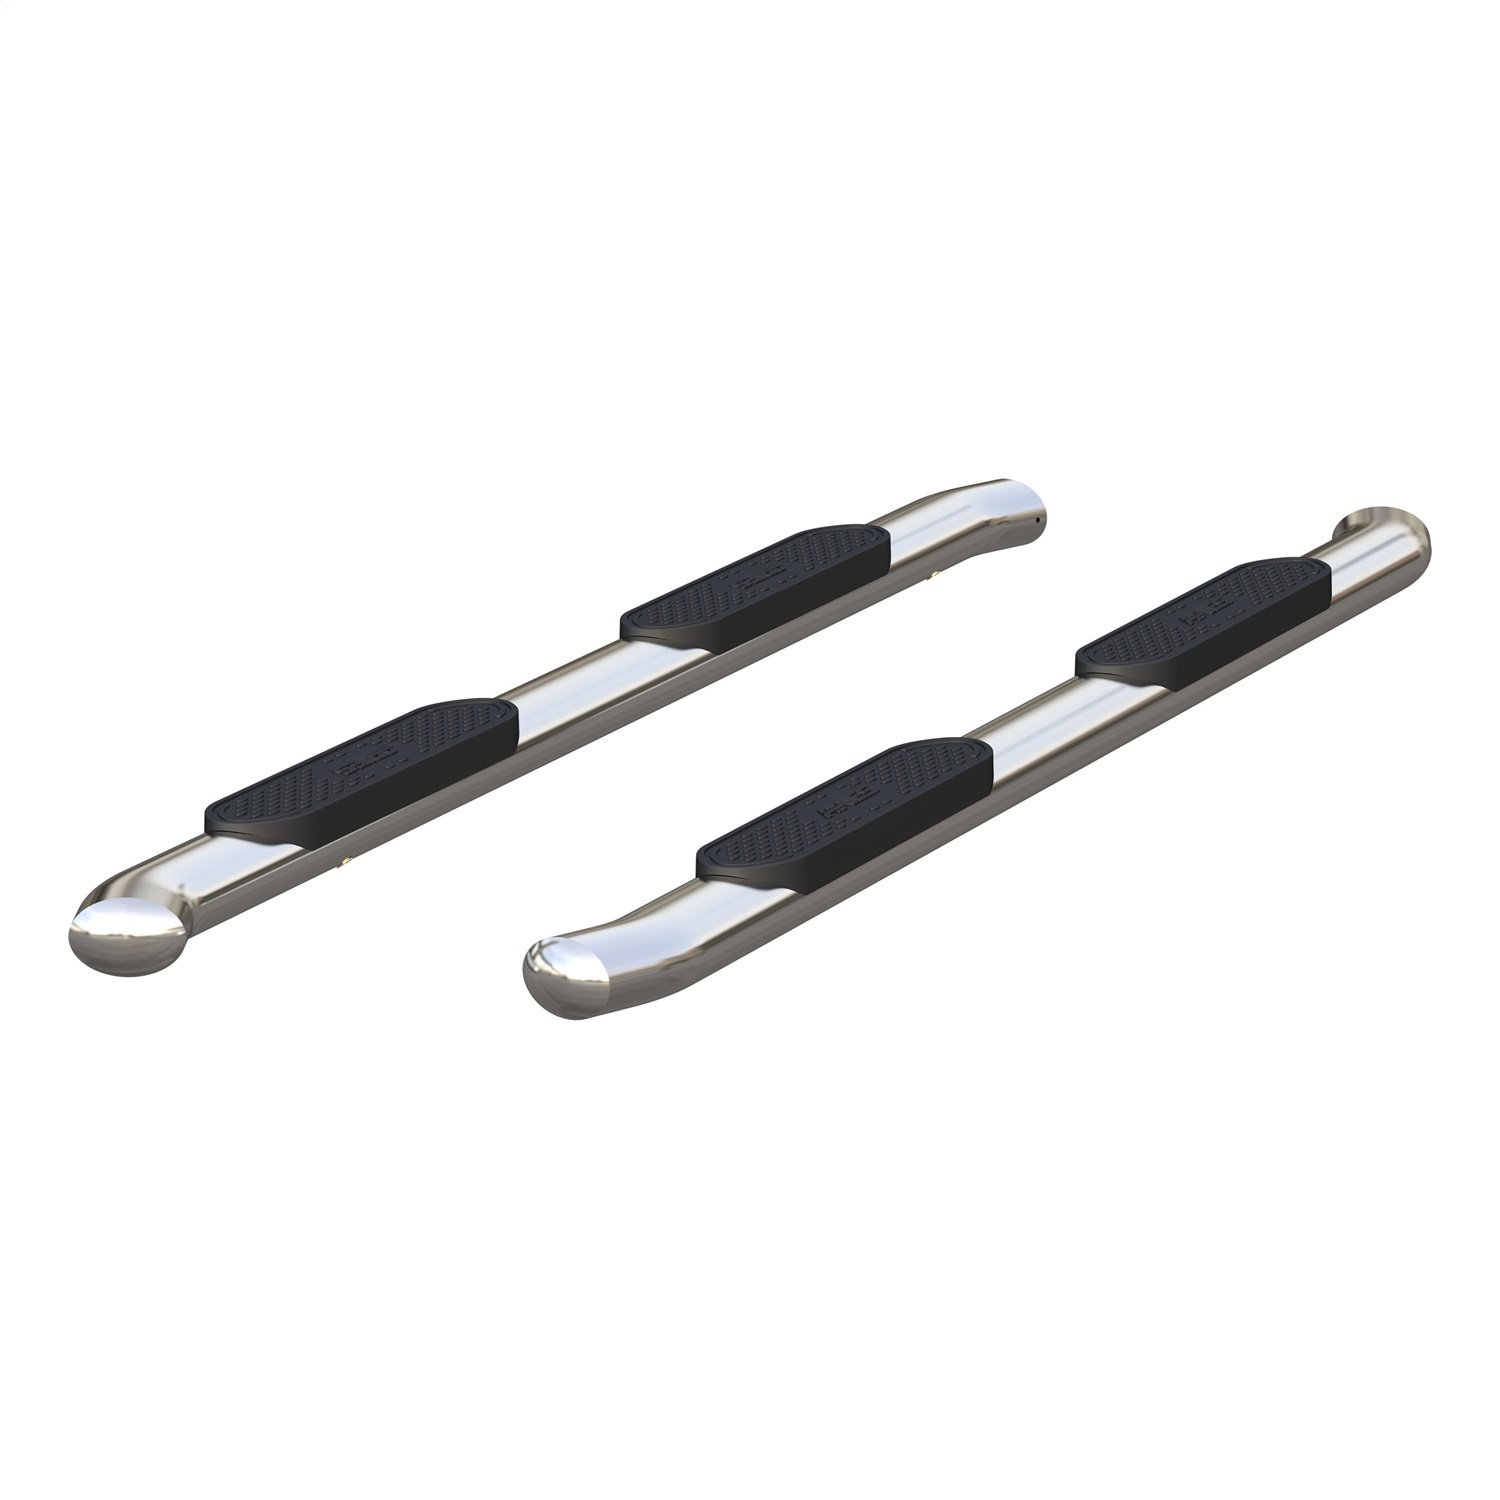 S223006-2 Stainless Steel 4 in. Oval Side Bars for 1999-2016 Ford F-250/F-350 Super Duty, 2001-2005 Ford Excursion